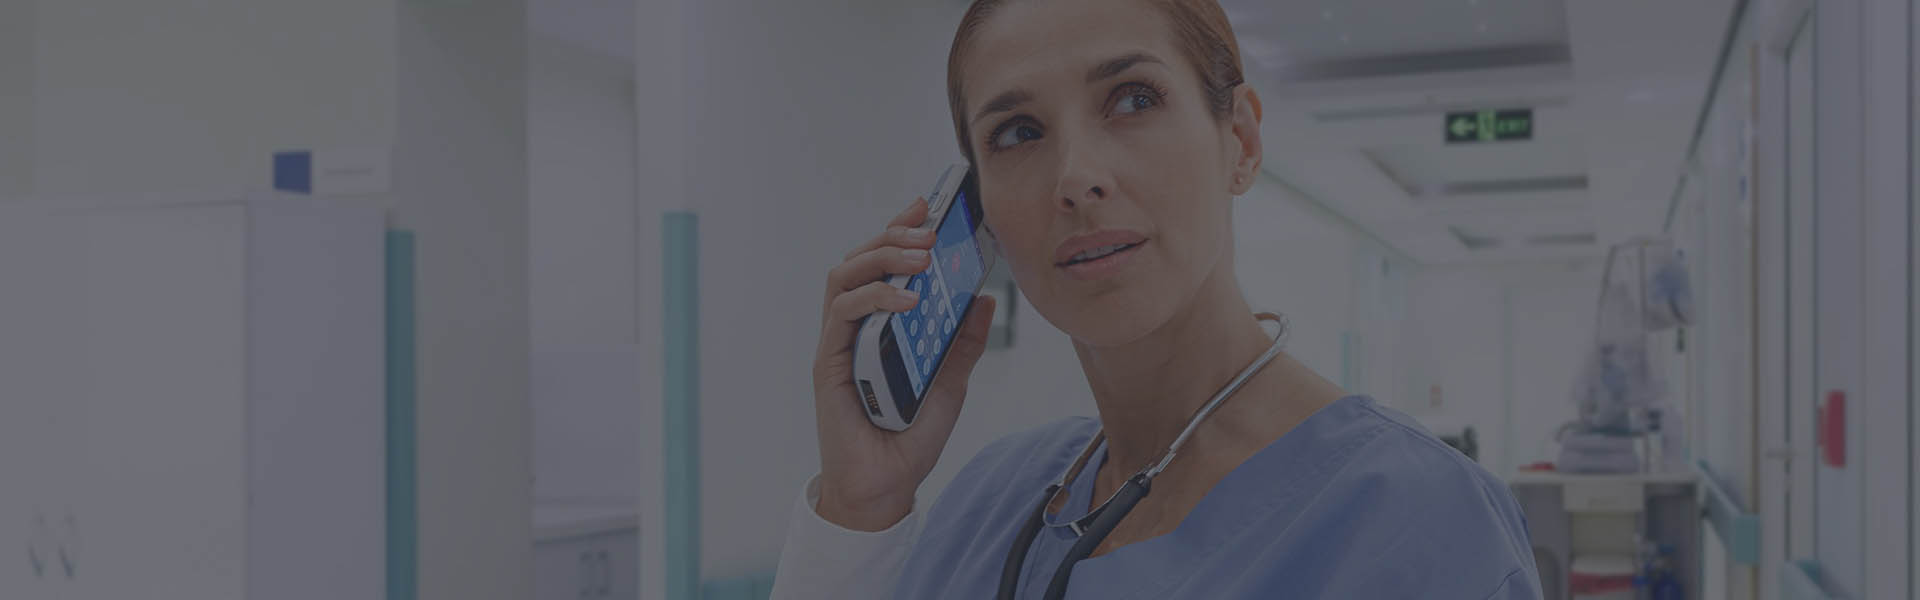 Female medical professional holding connectivity mobile device to ear in a hospital setting